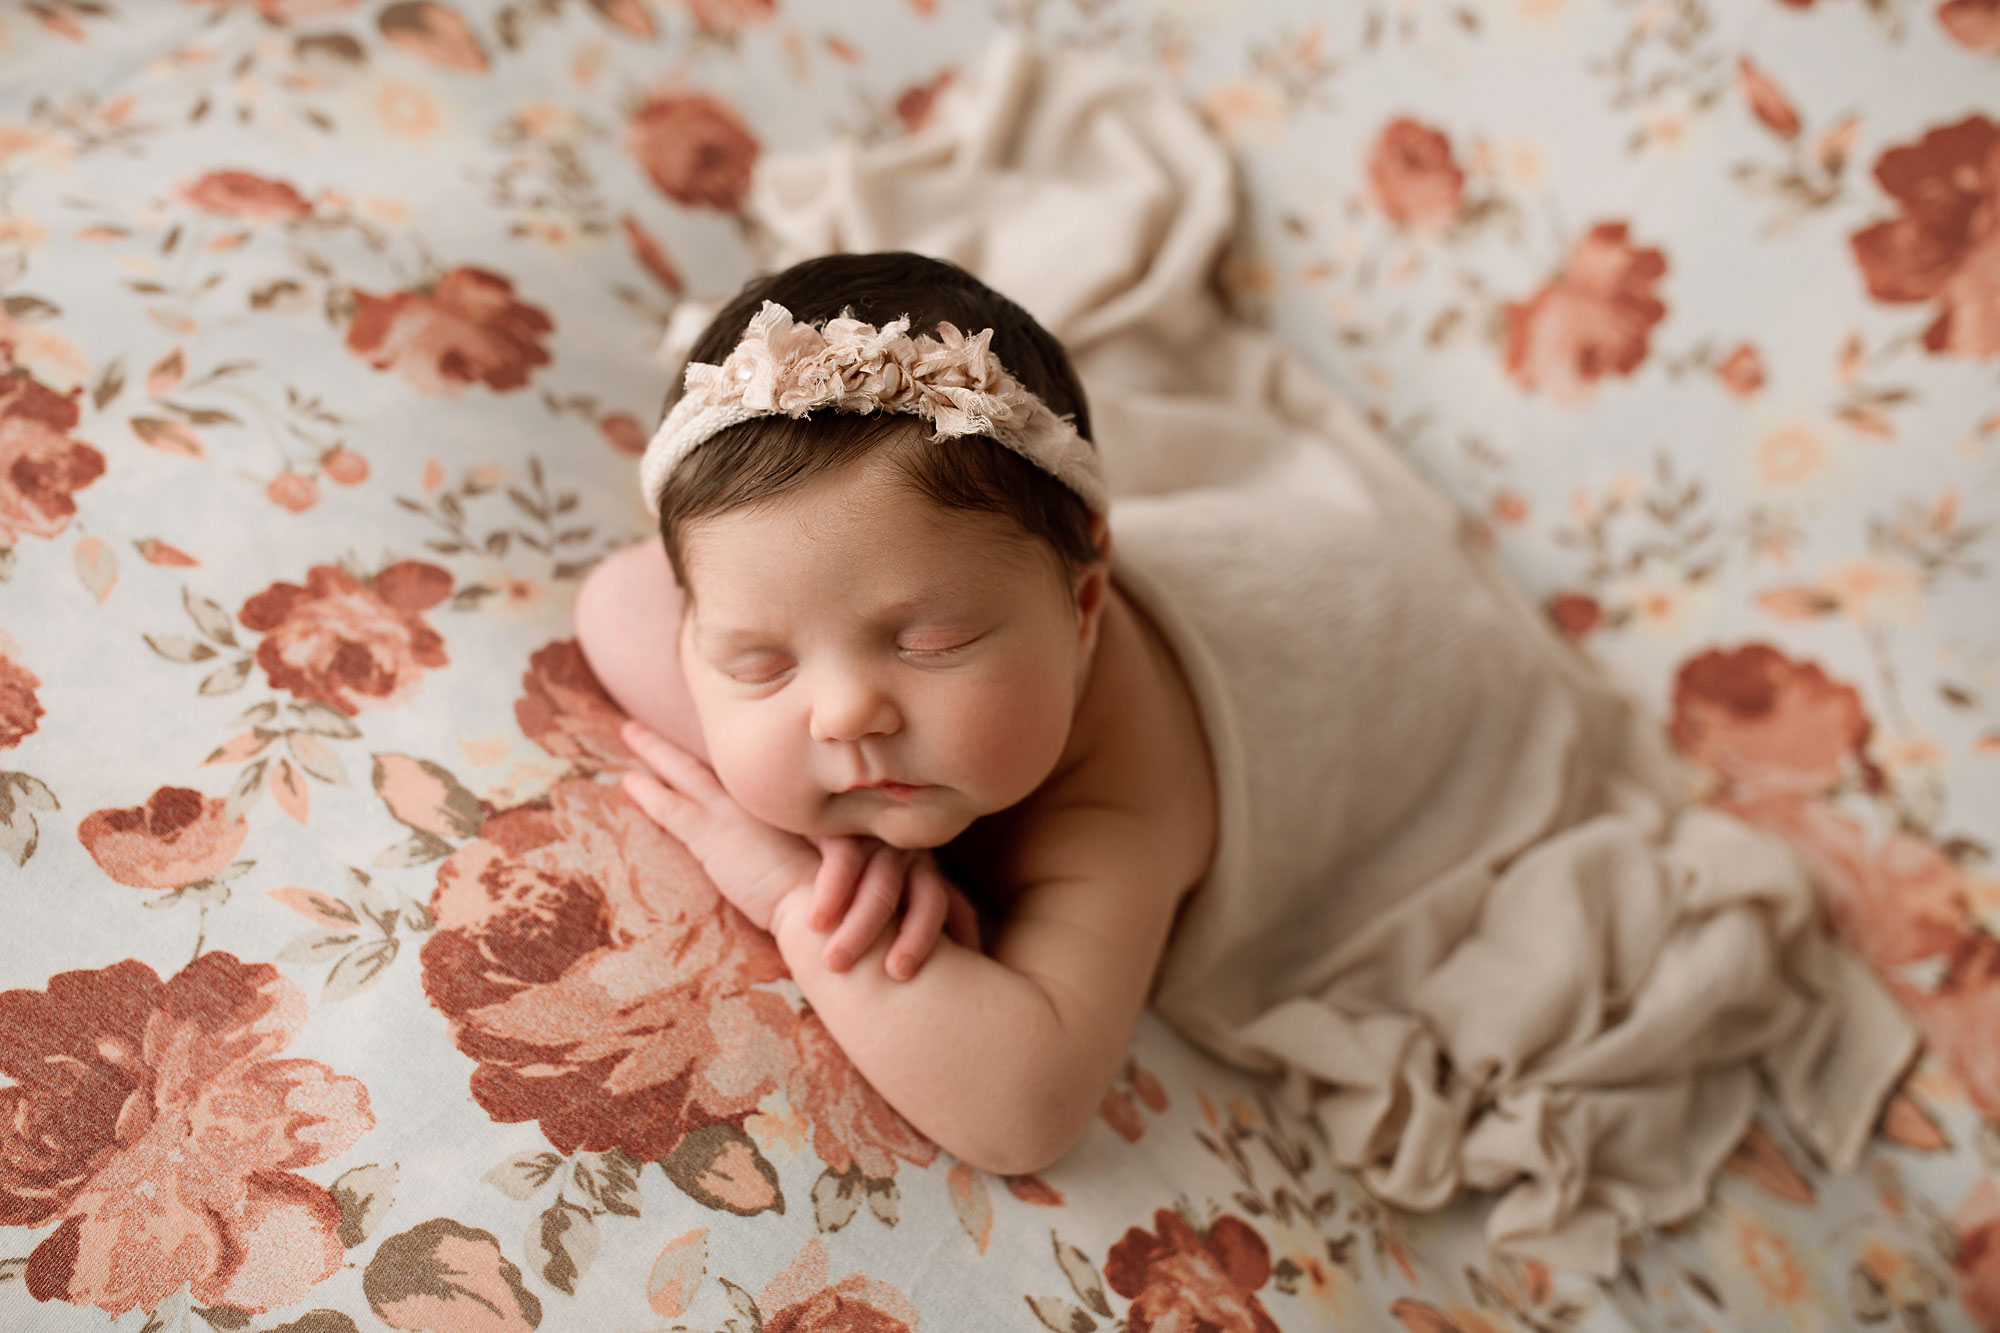 newborn baby sleeping on a floral backdrop, beanbag posing, head on hands pose, neutral set up